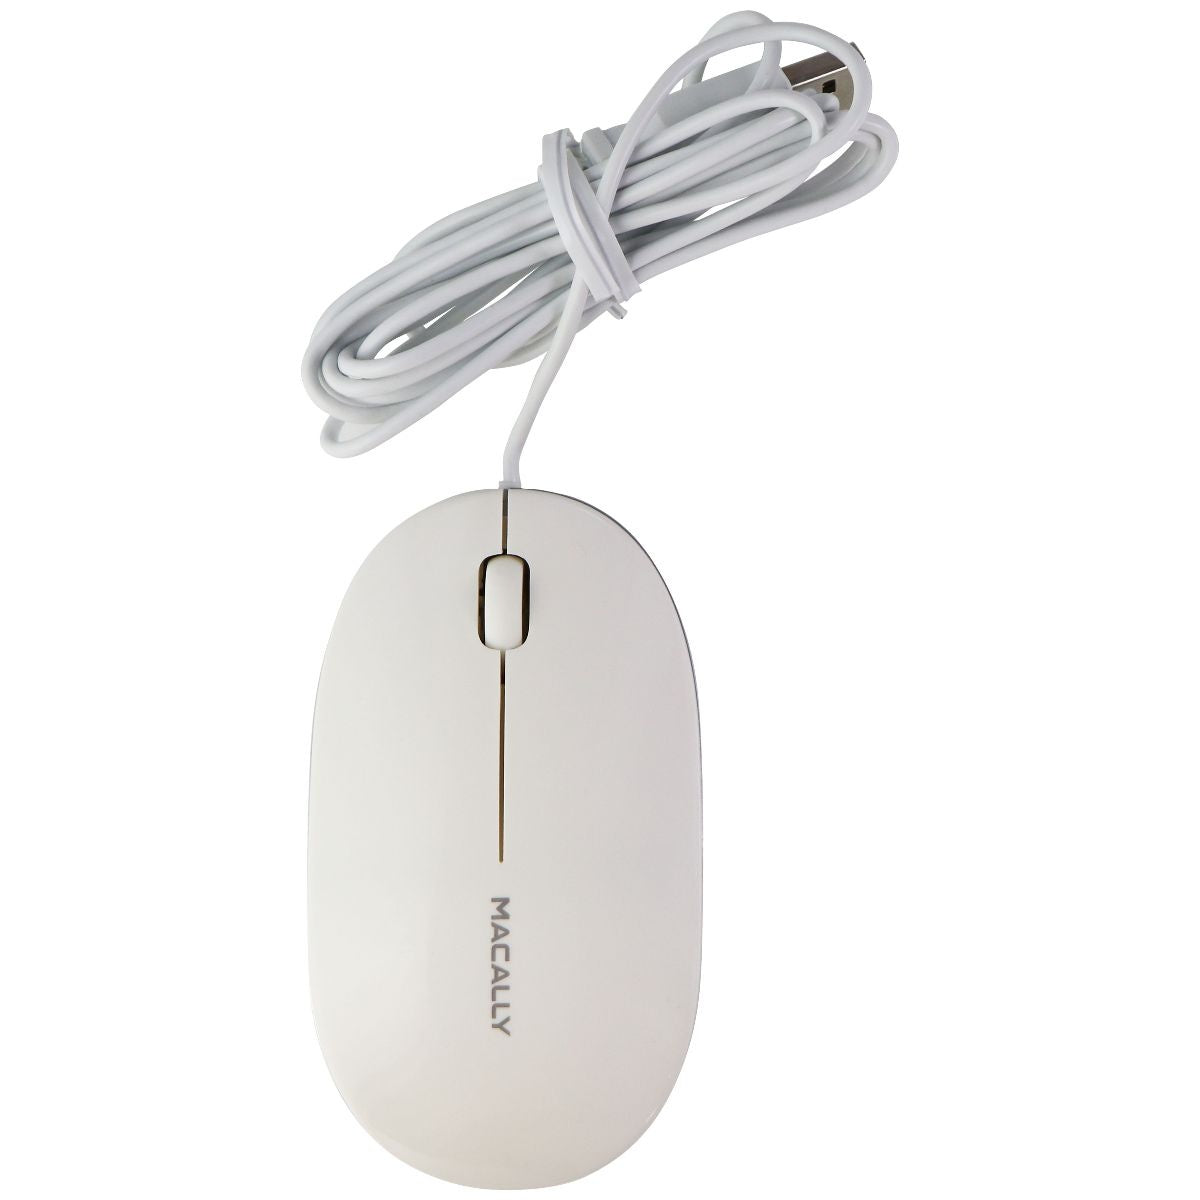 Macally Wired USB Ice Mouse2 for Windows PC & More - White (ICEMOUSE2) / 5Ft